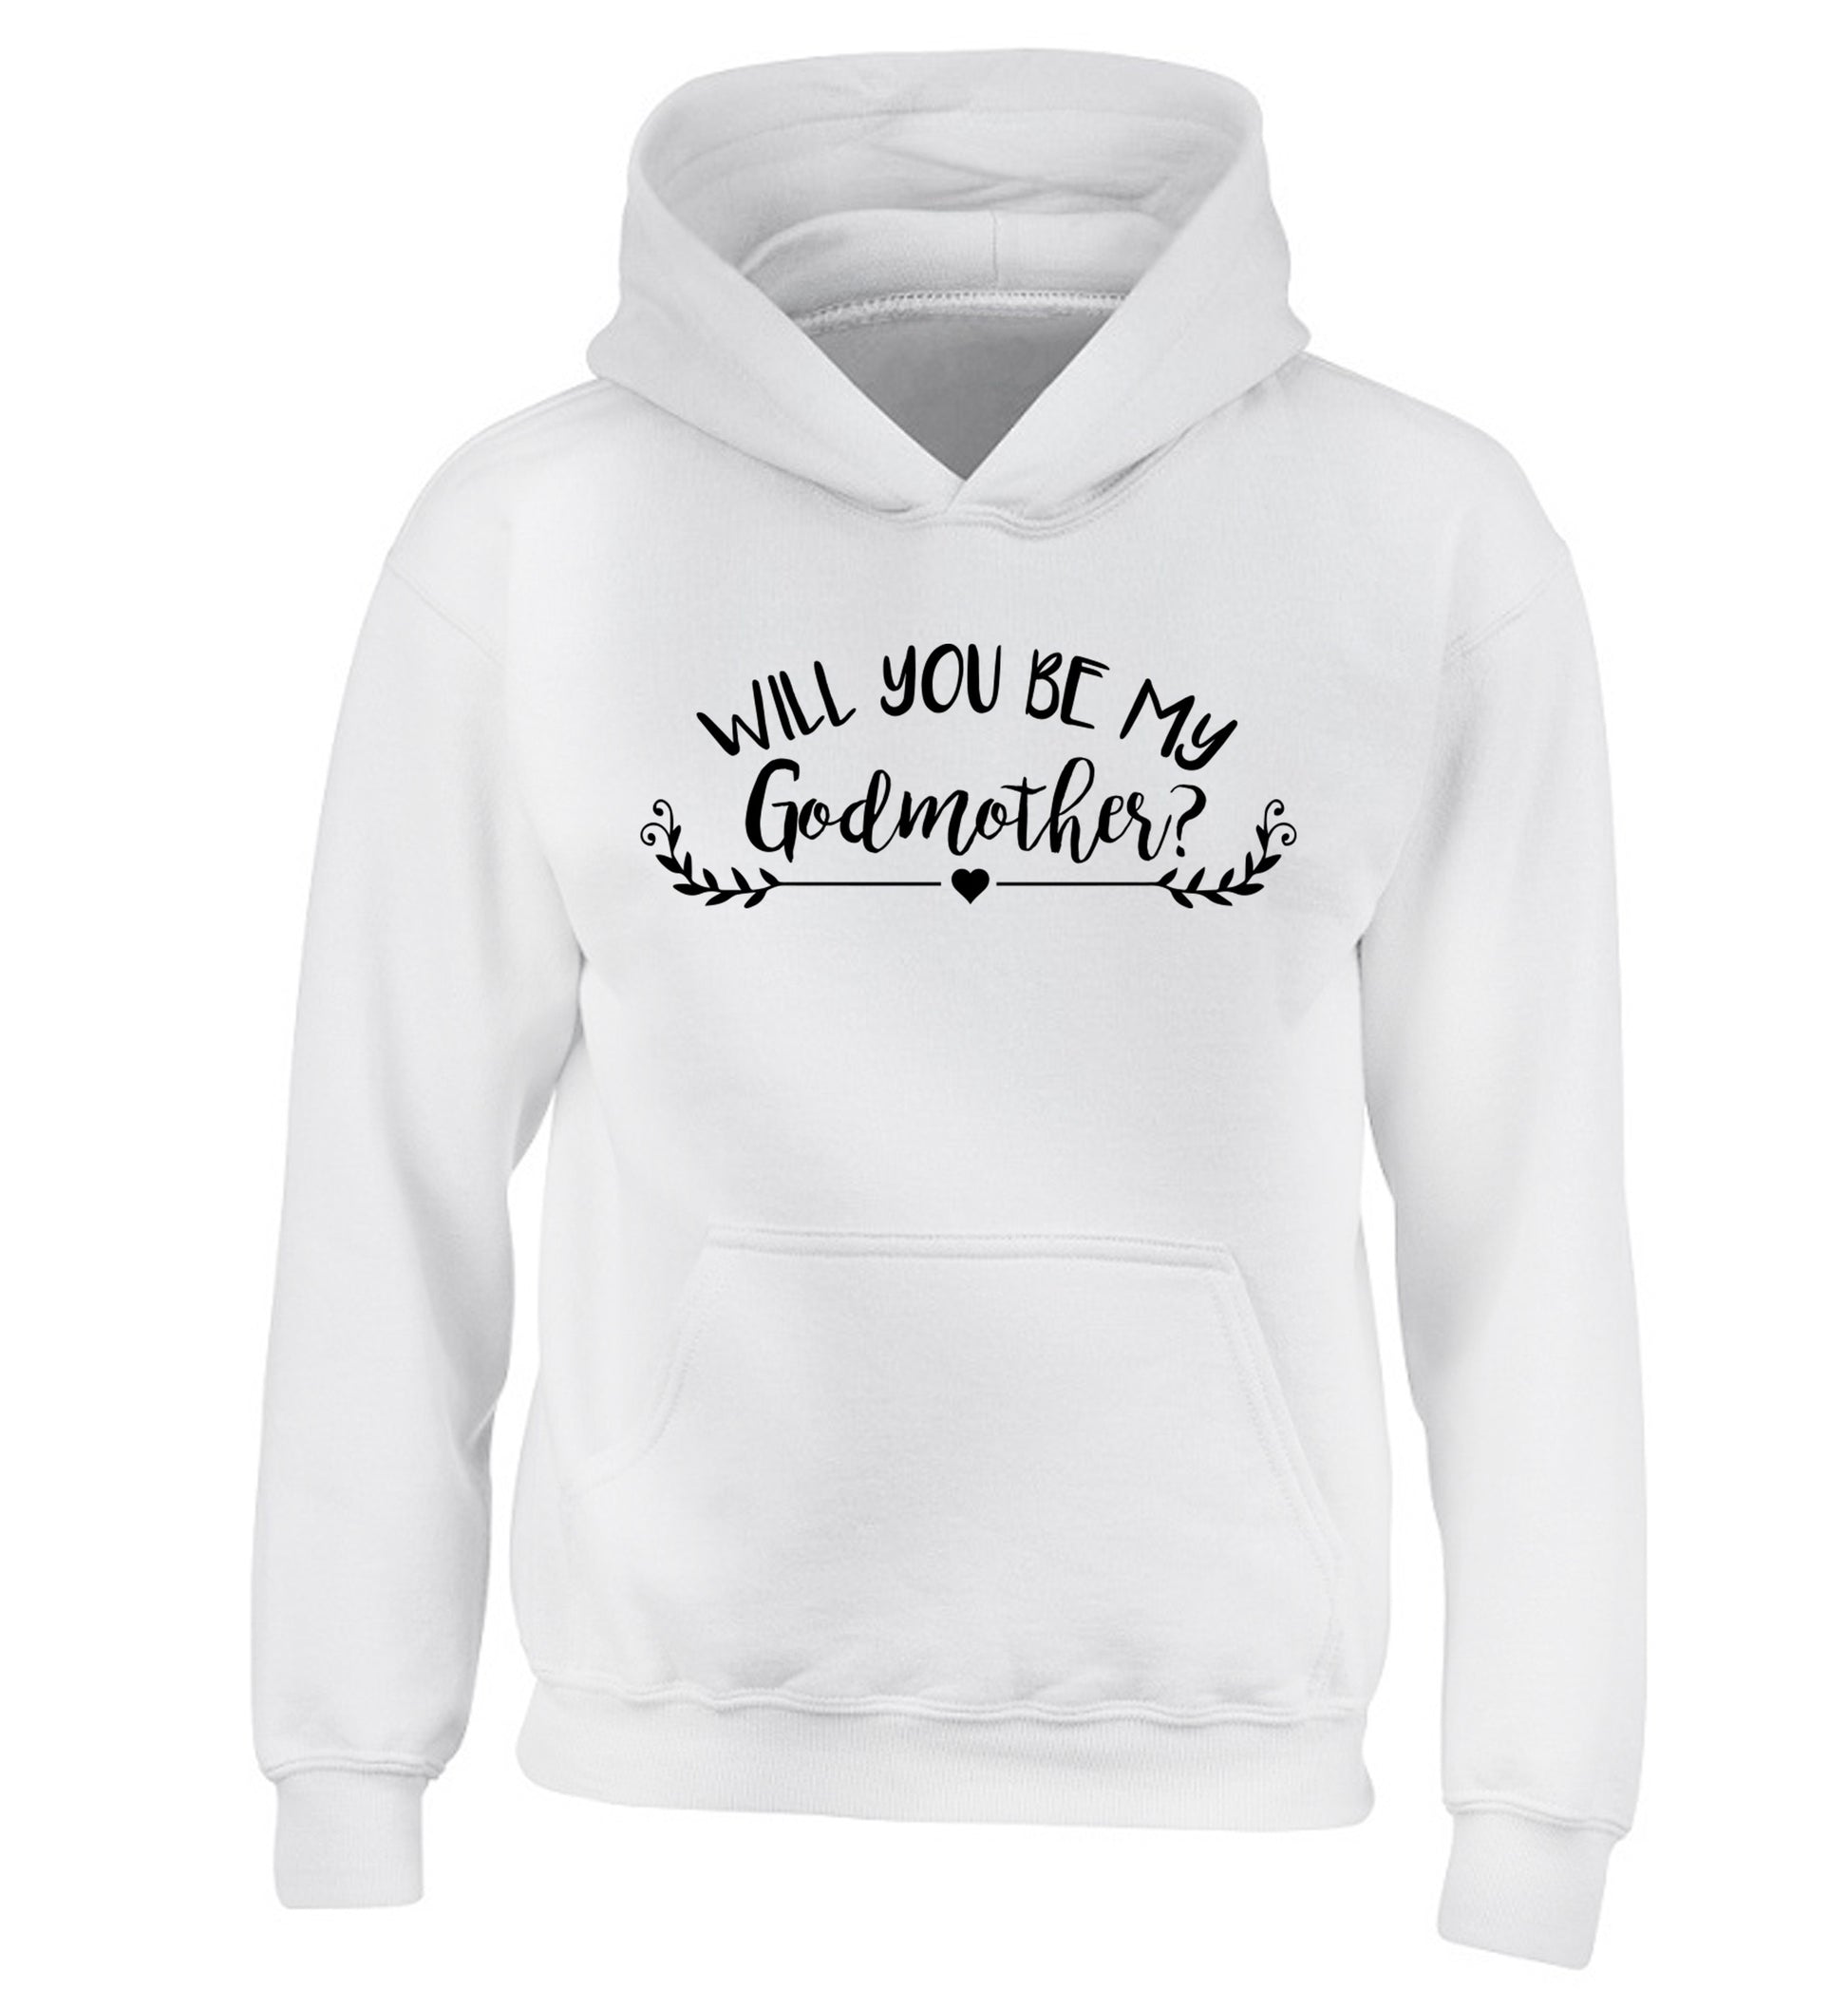 Will you be my godmother? children's white hoodie 12-14 Years